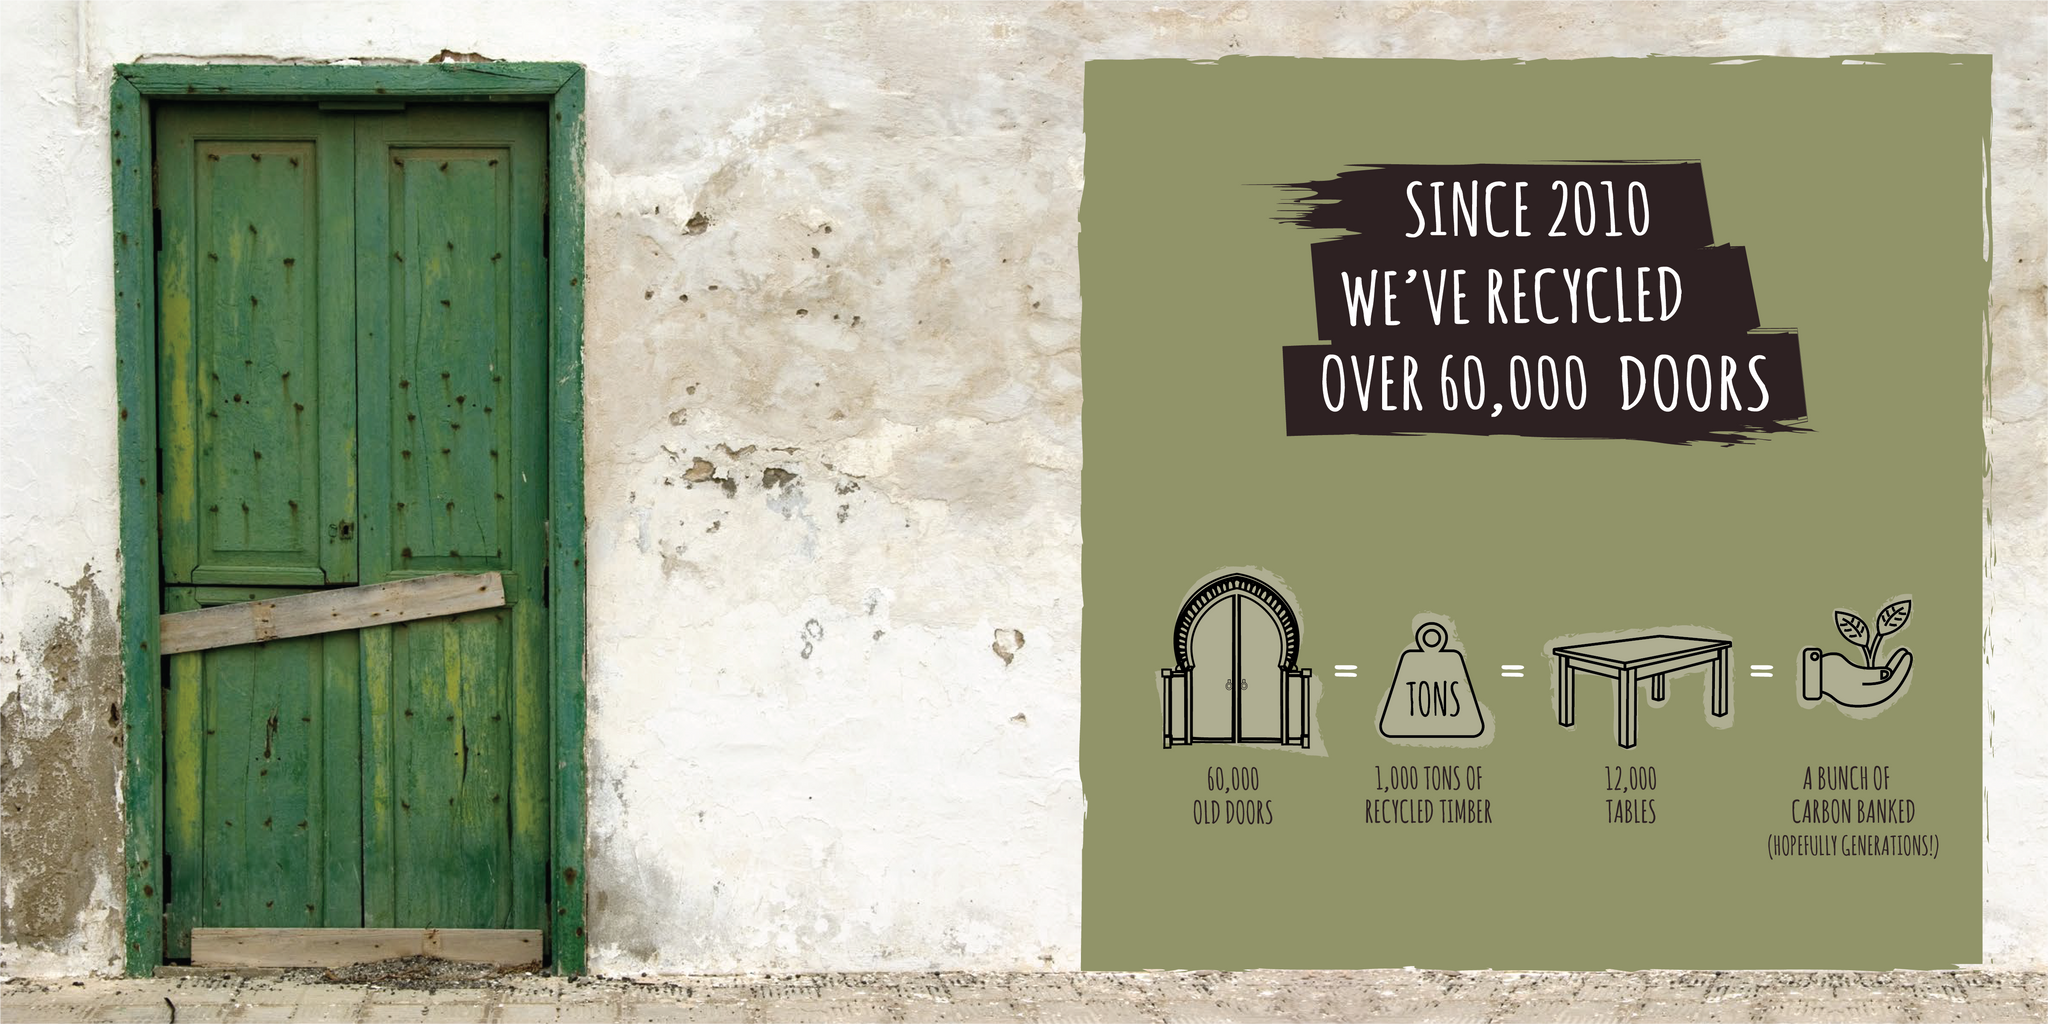 recycled over 60,000 doors since 2010 